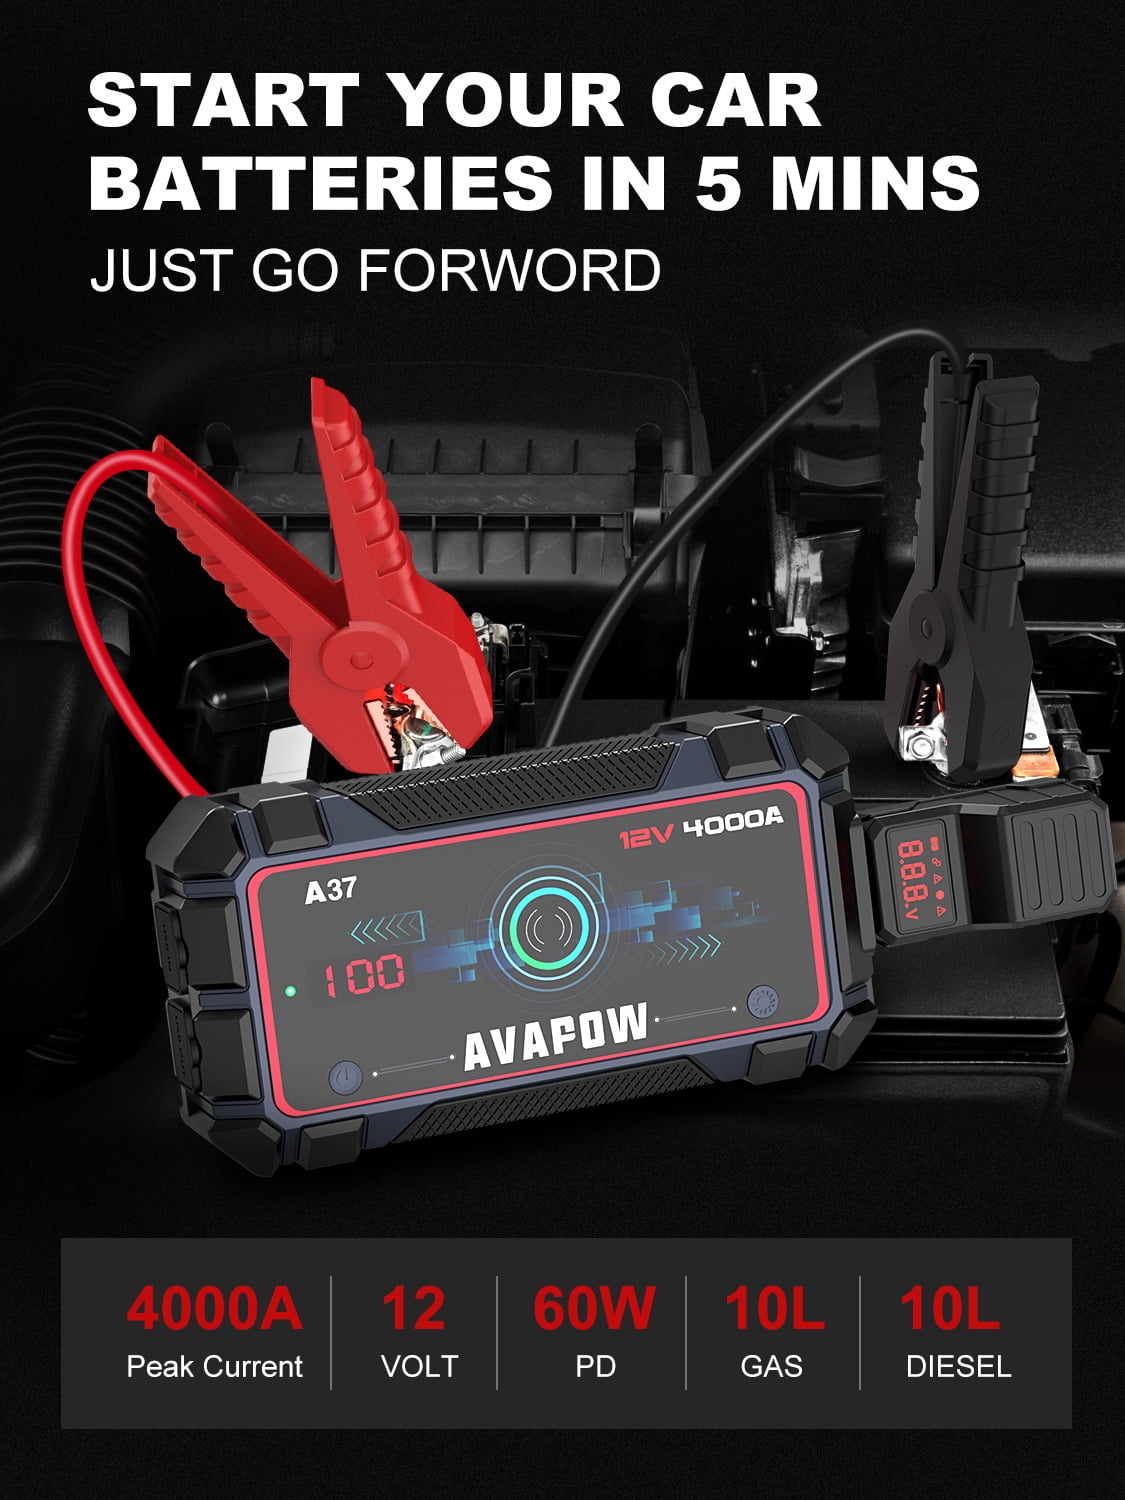 AVAPOW Car Battery Jump Starter 4000A Peak,12V Portable Jumpstart Box for  up to 10L Gas 10L Diesel Engine with Booster Function,PD 60W Fast Charging  Lithium Jump Starters Charger Pack 